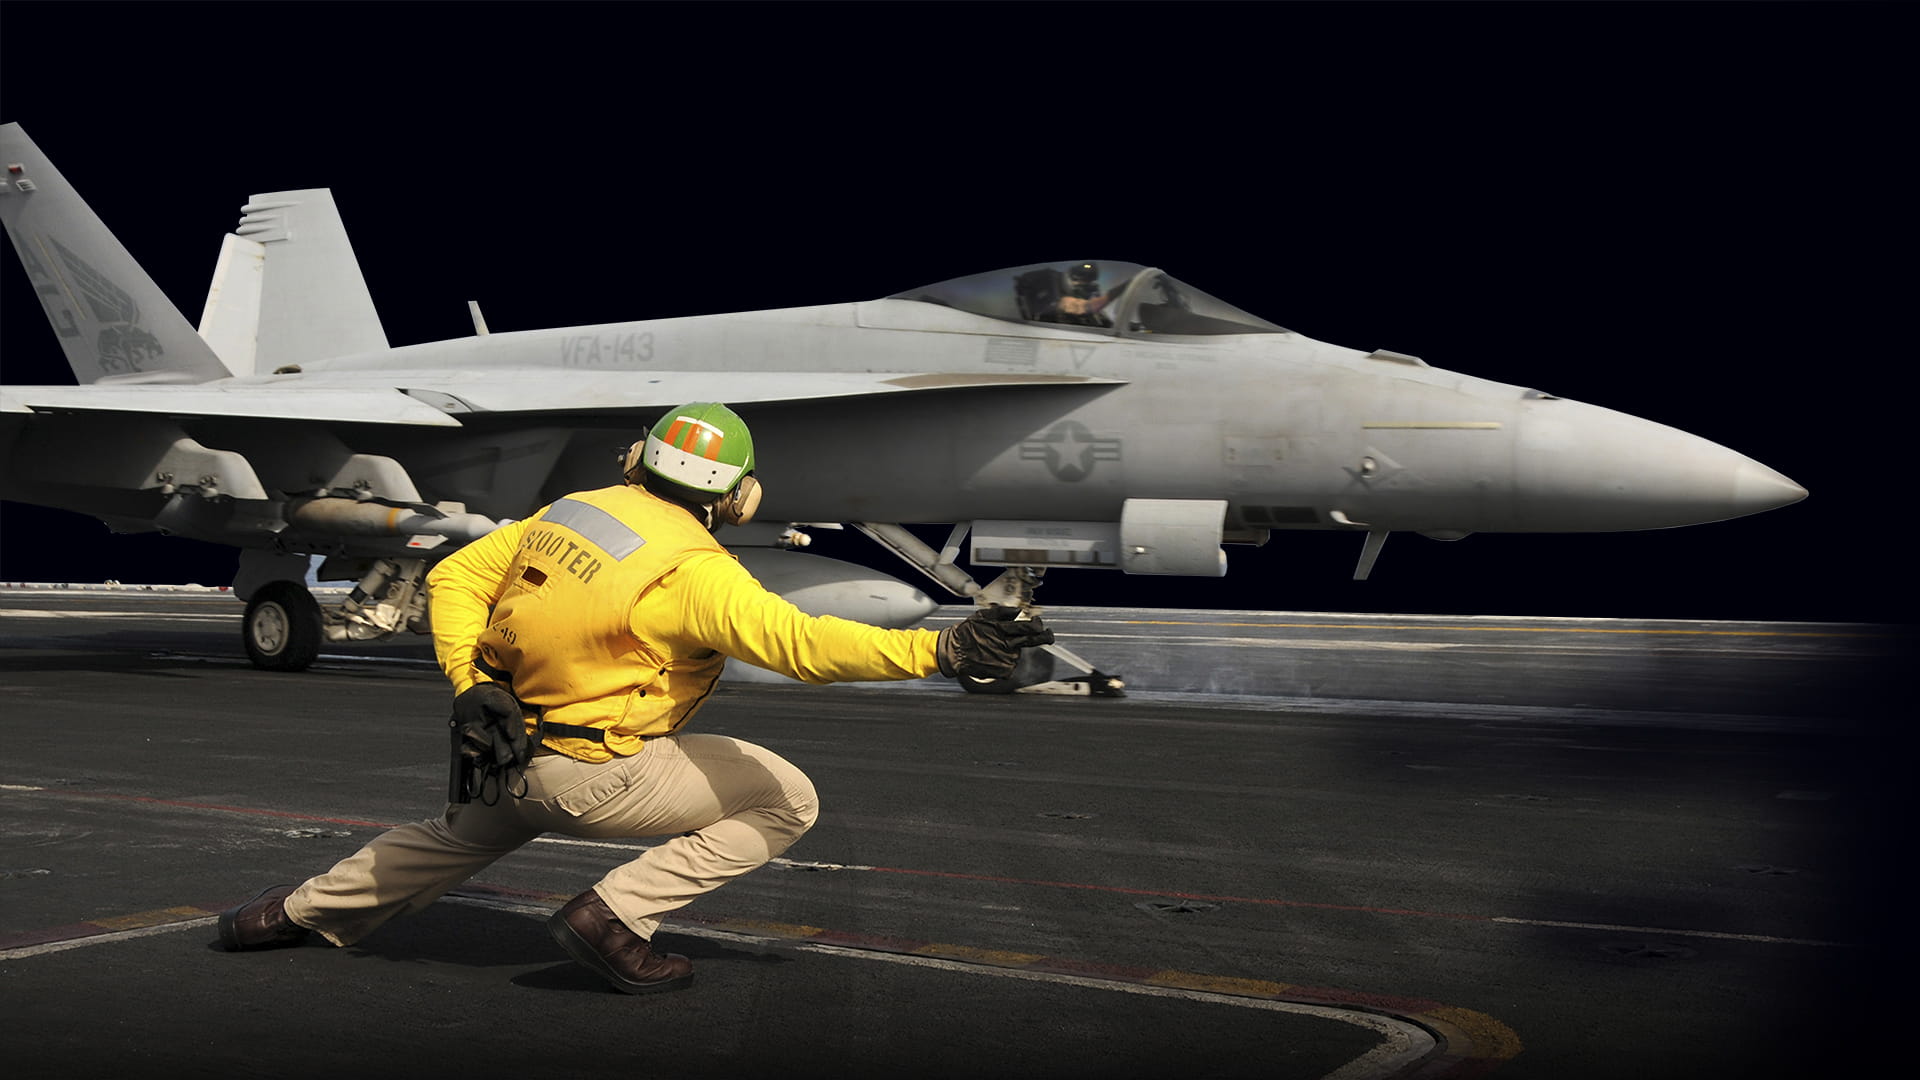 F-18 Hornet signal to take off